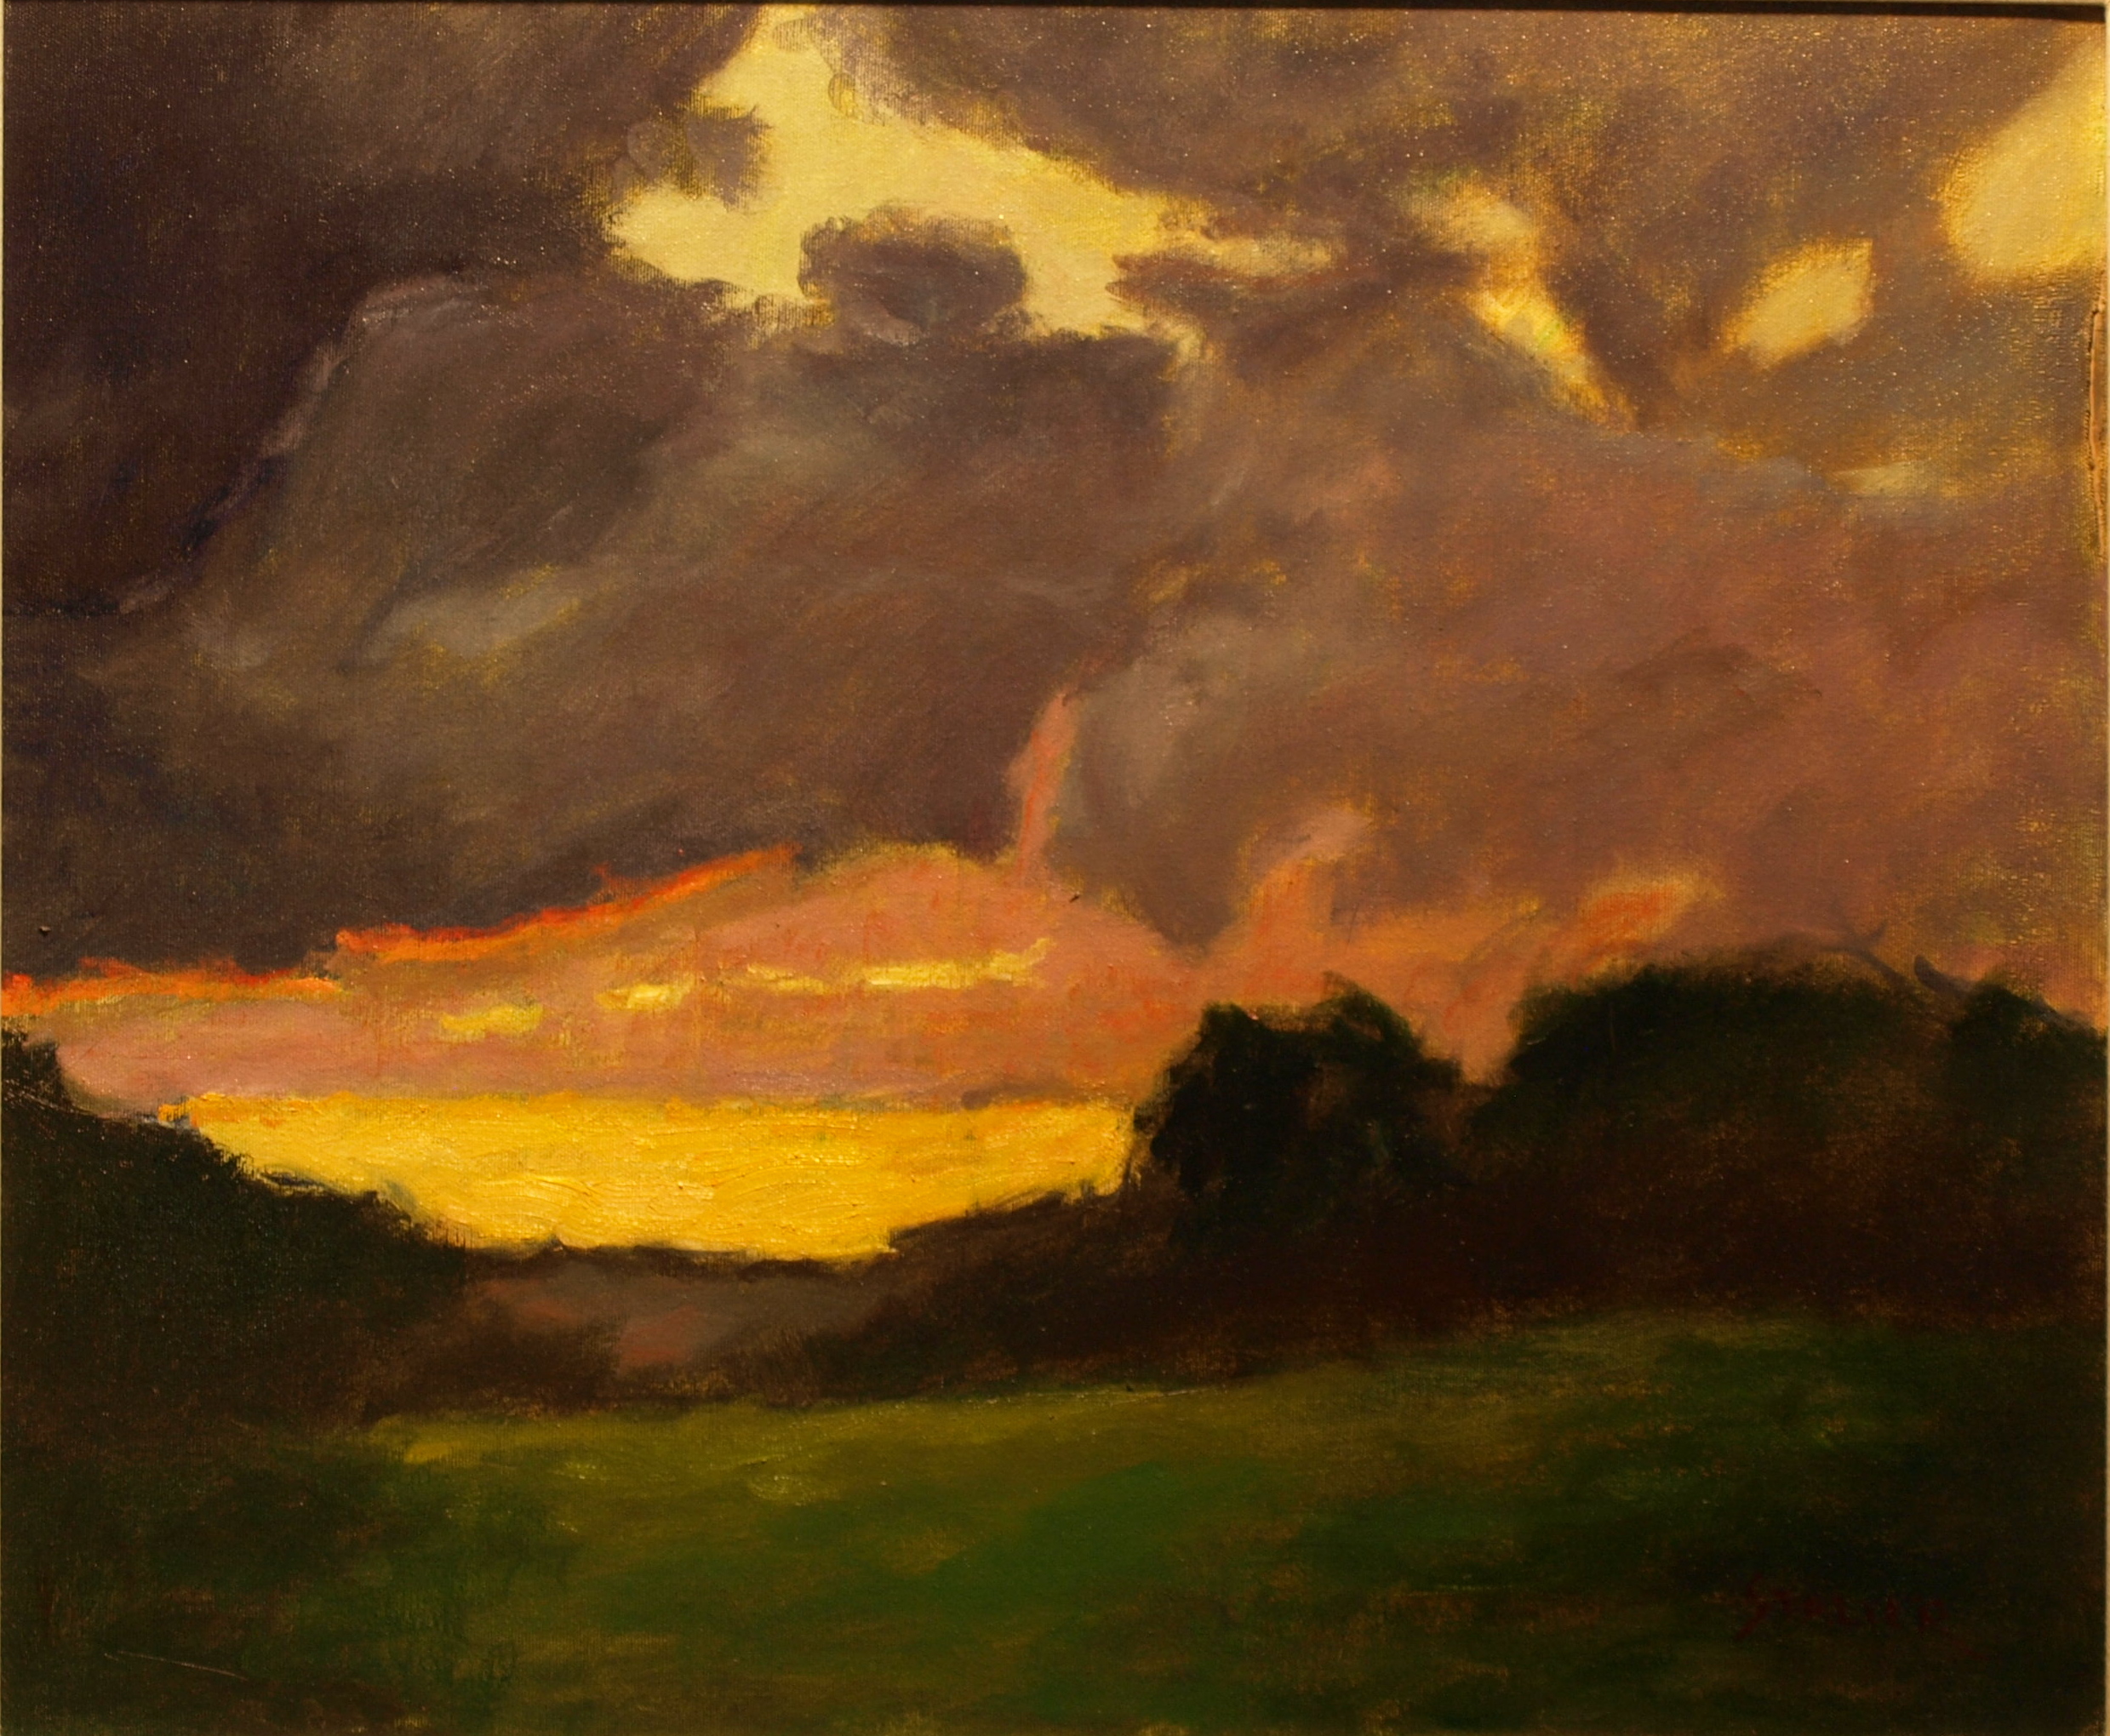 Last Light, Oil on Canvas, 20 x 24 Inches, by Richard Stalter, $650